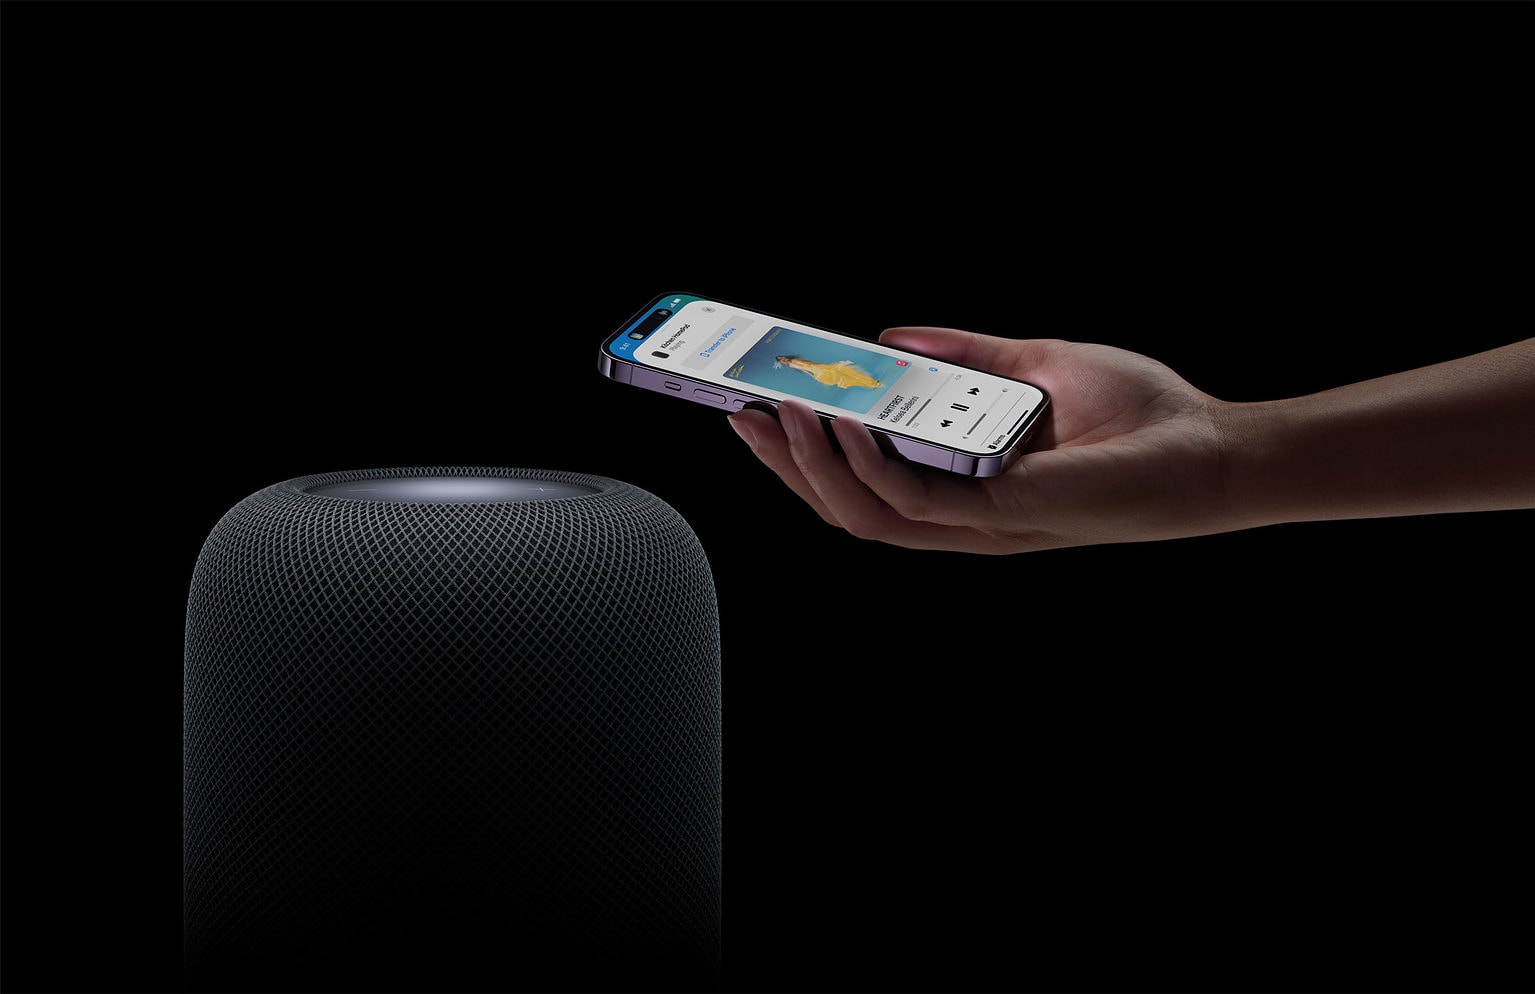 A second-generation HomePod and a hand holding an iPhone.